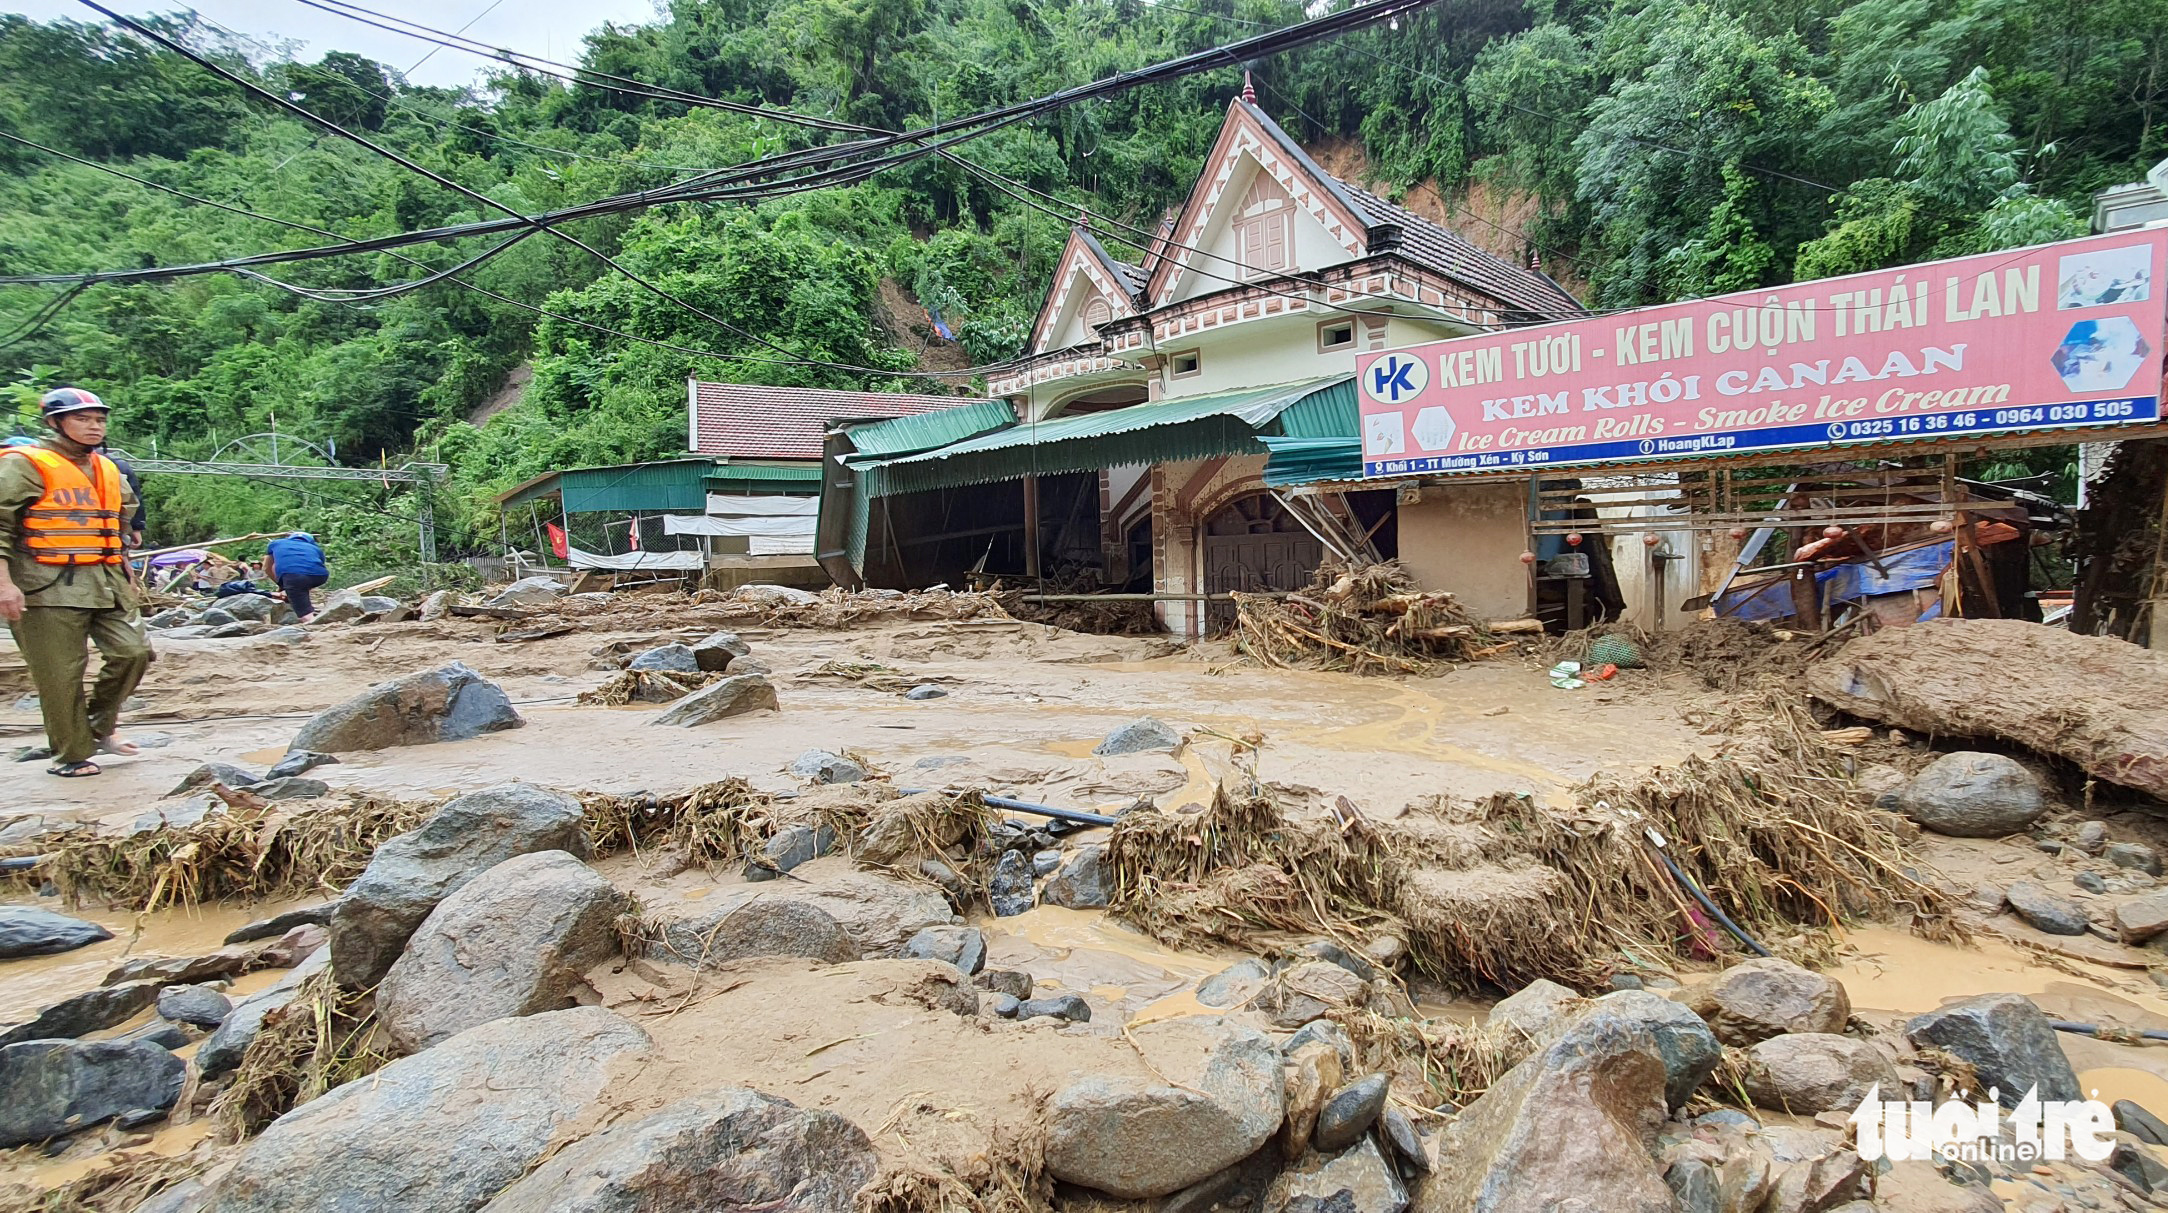 Rocks and debris block houses following a flash flood in Ky Son District, Nghe An Province, Vietnam, October 2, 2022. Photo: Duong Tinh / Tuoi Tre